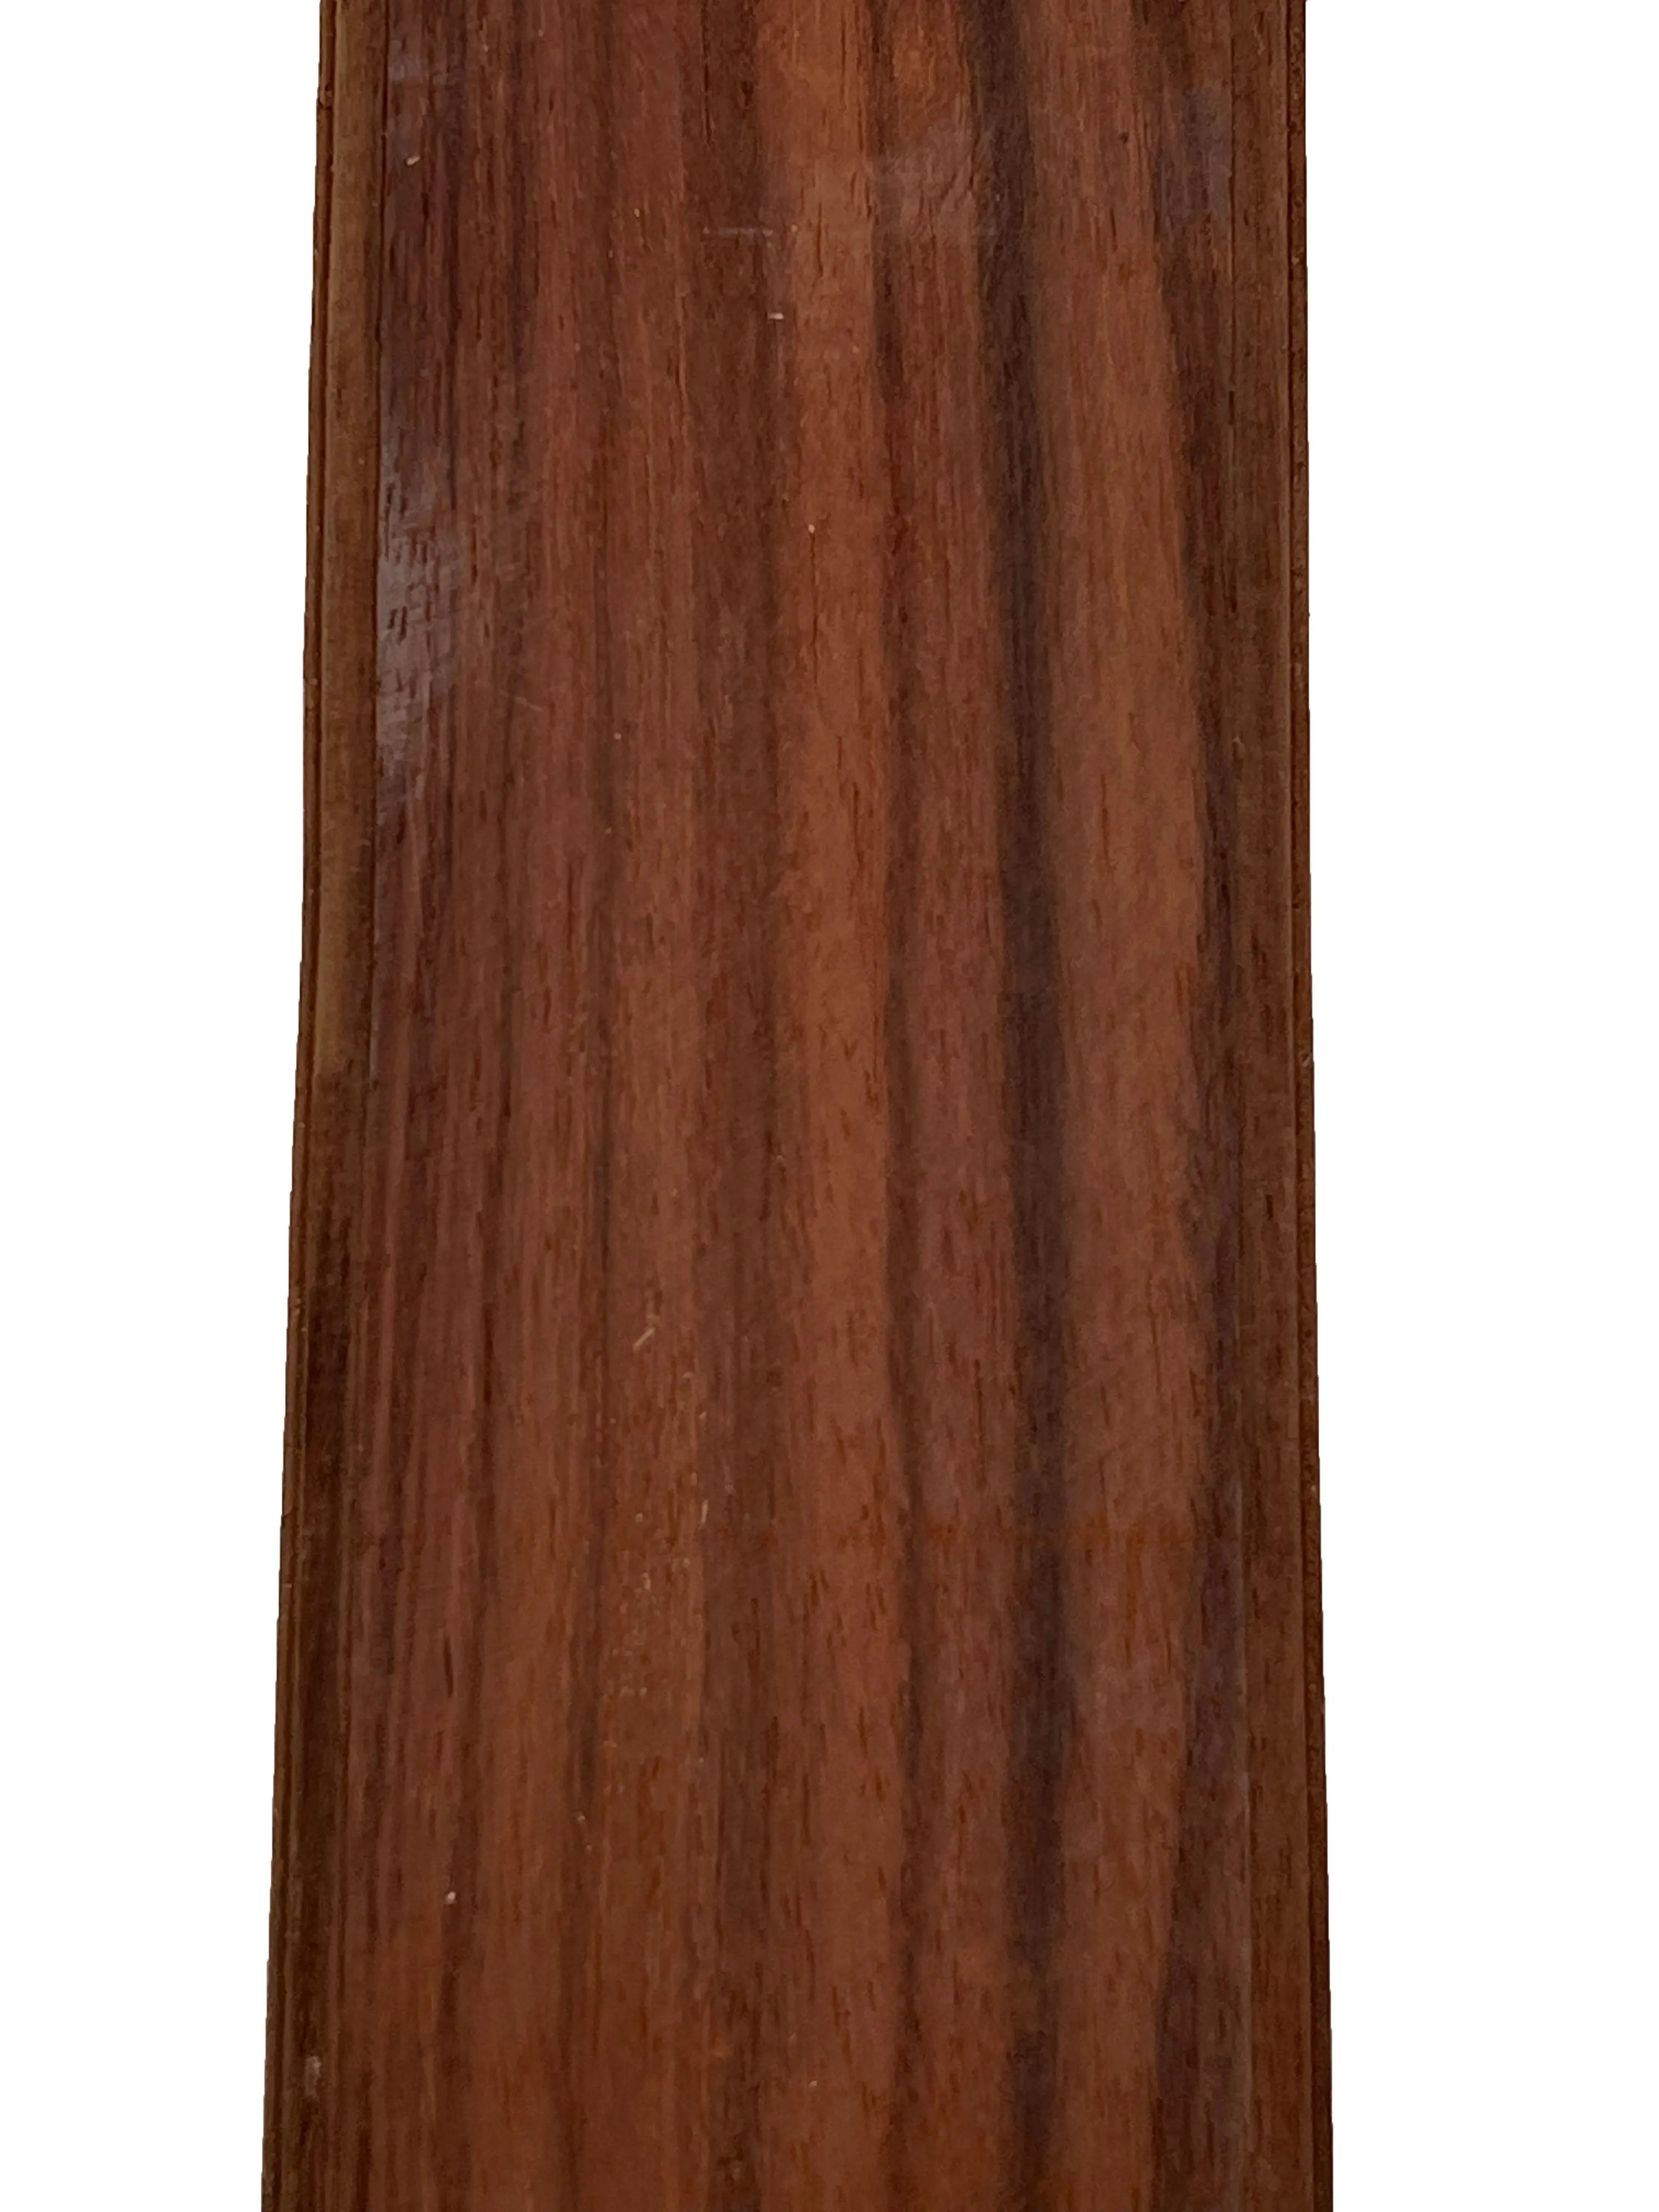 East Indian Rosewood Electrical/ Bass Wood Guitar Neck Blank 31x4